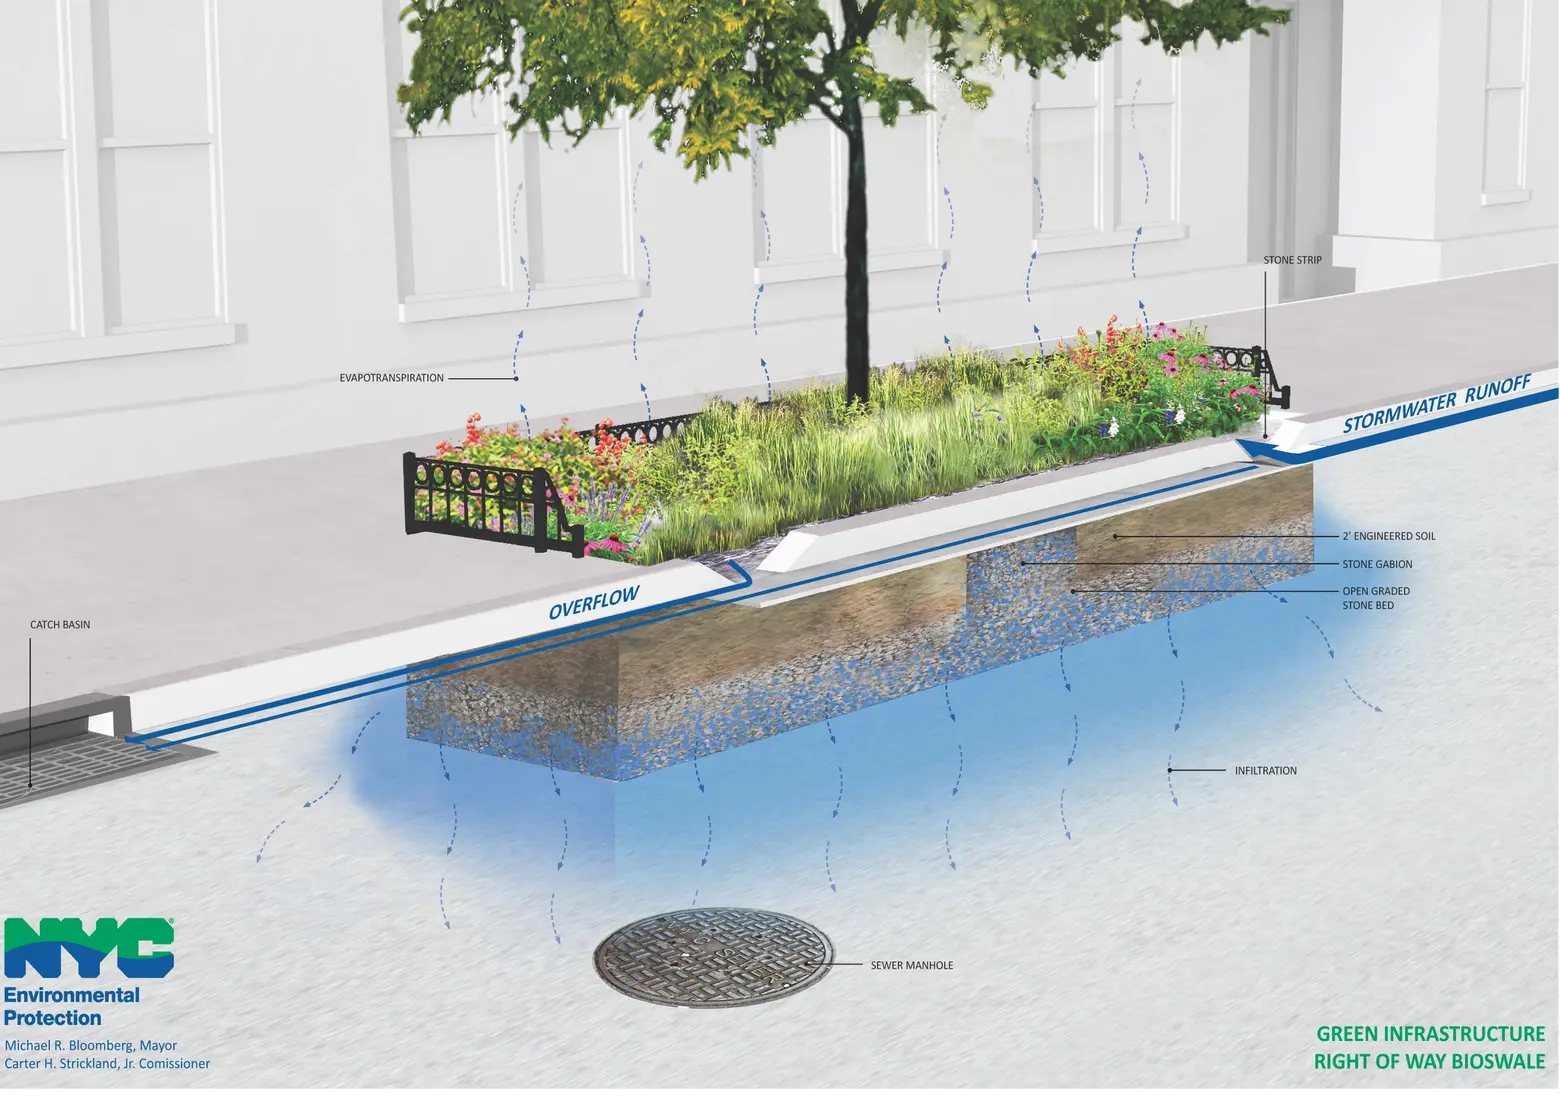 Bioswale, green infrastructure, department of environmental protection